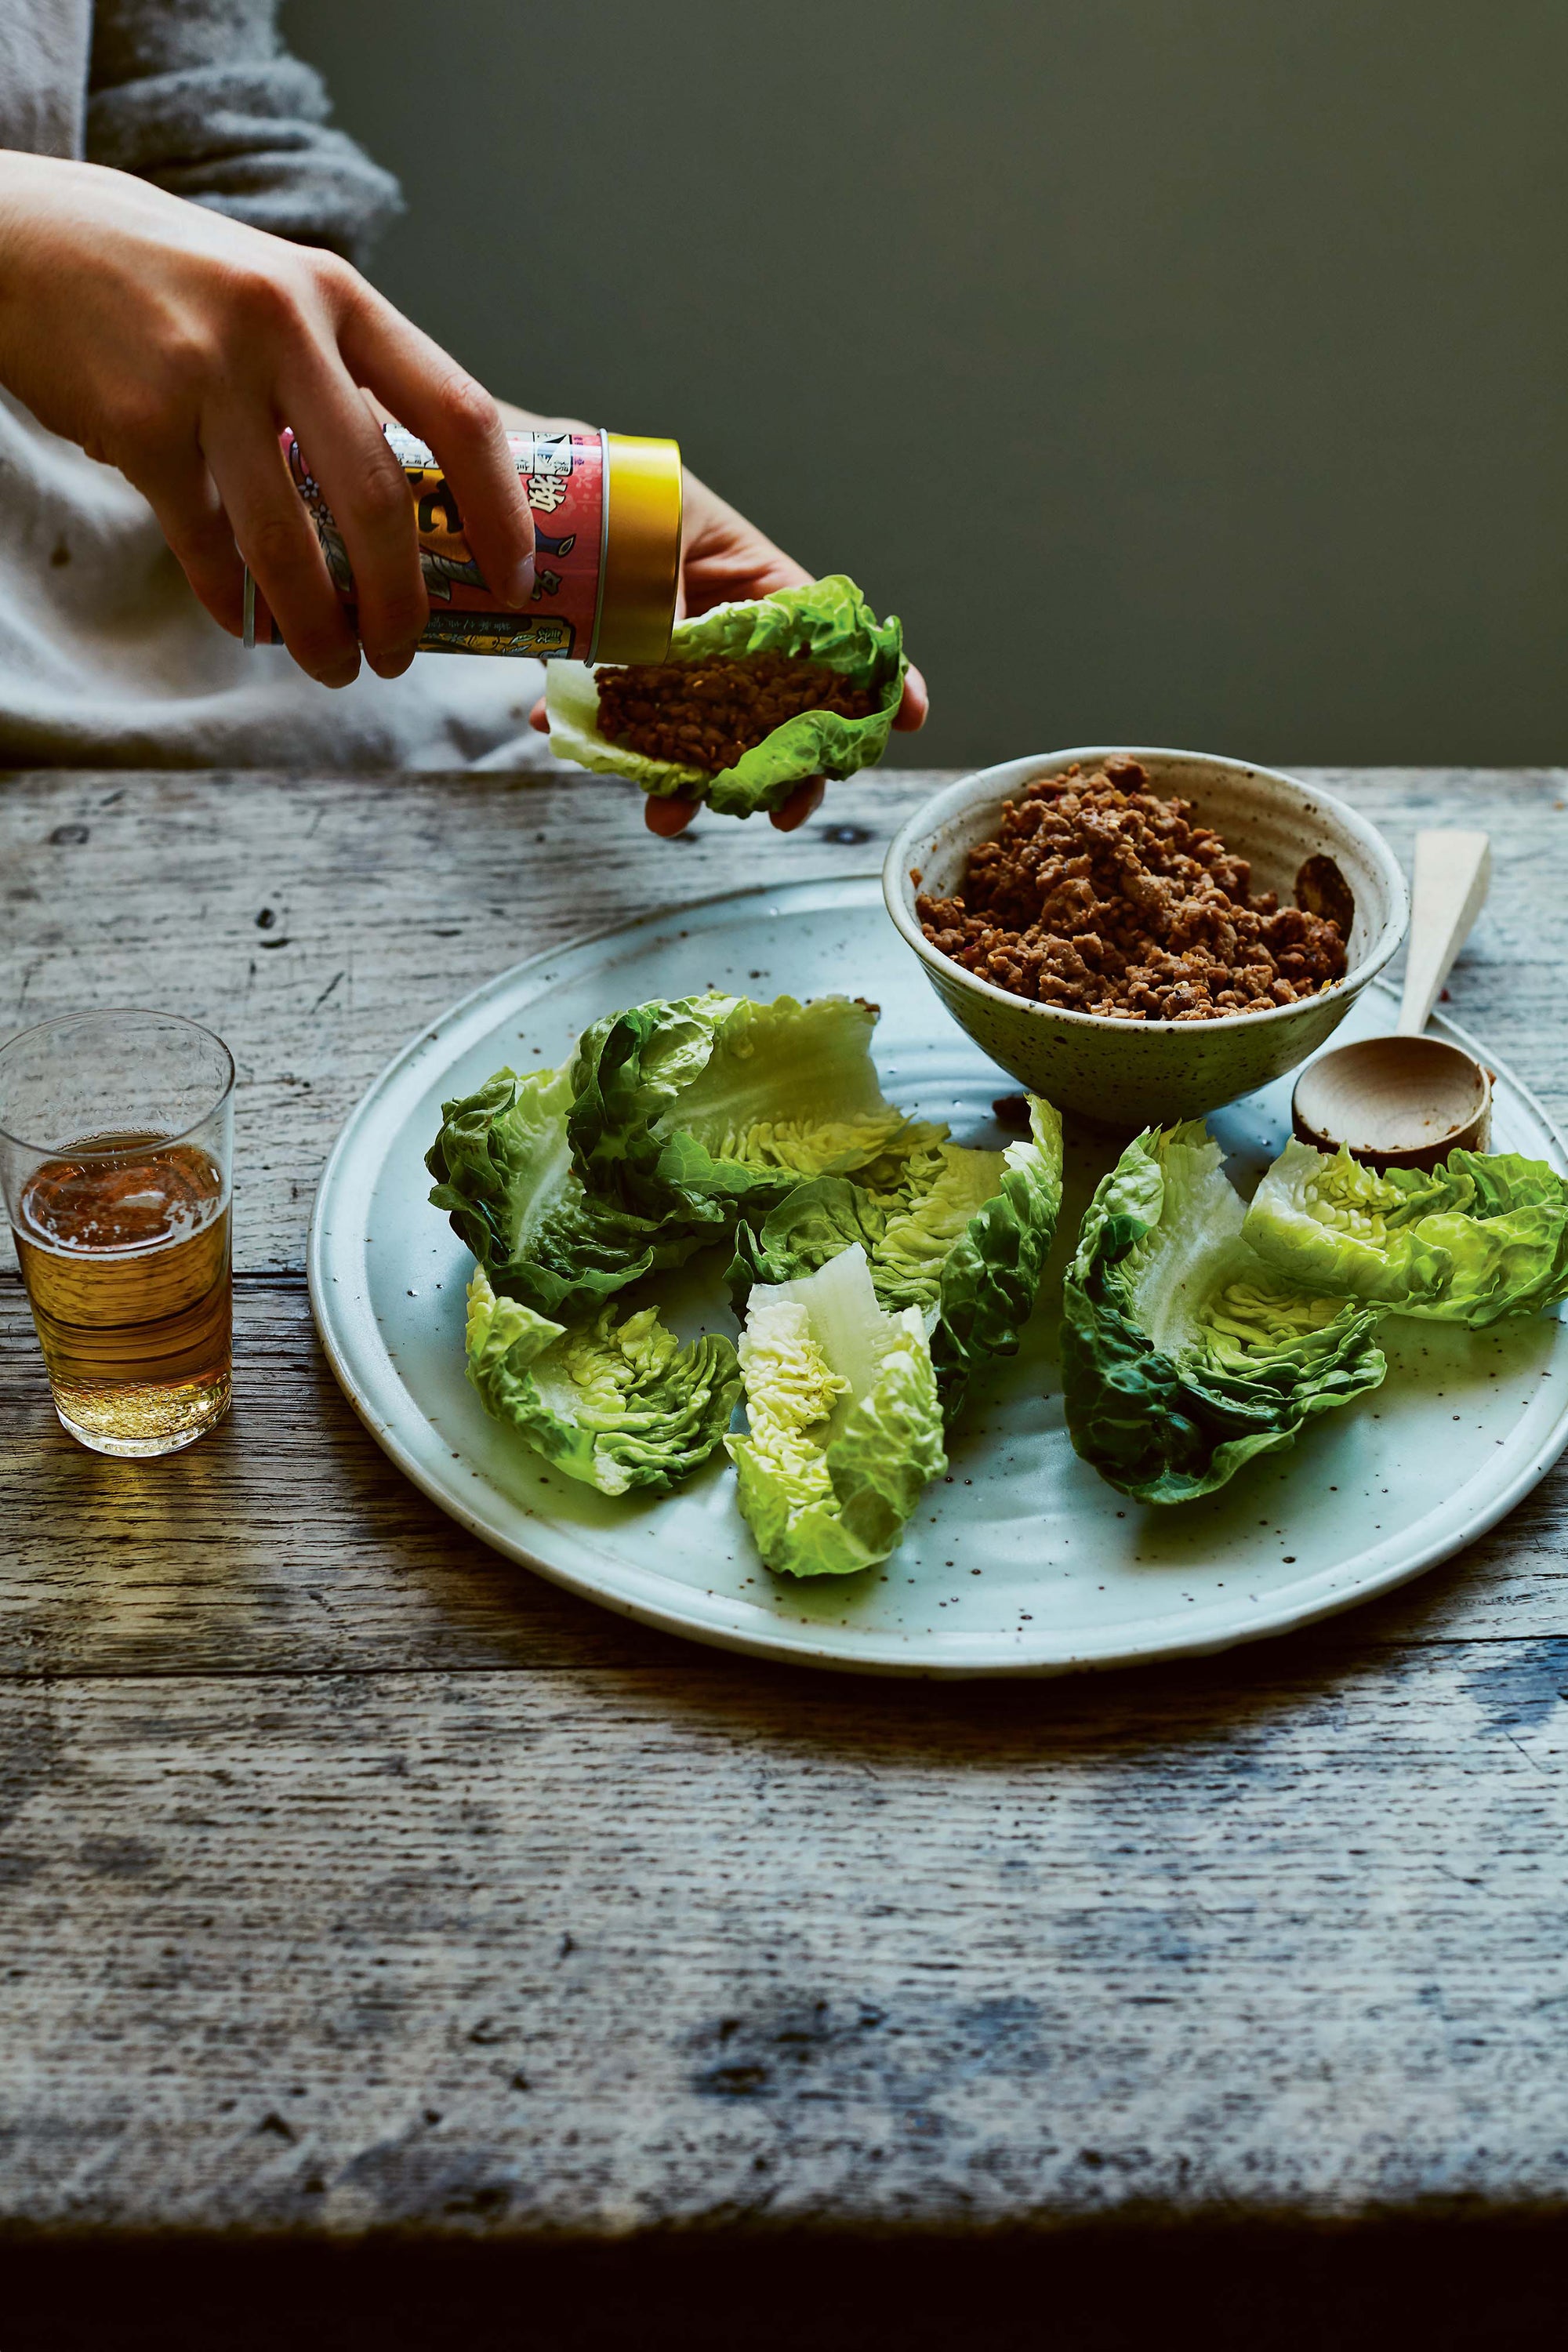 You can serve it with tofu, rice or noodles, but this is the classic way: spooned into lettuce leaves